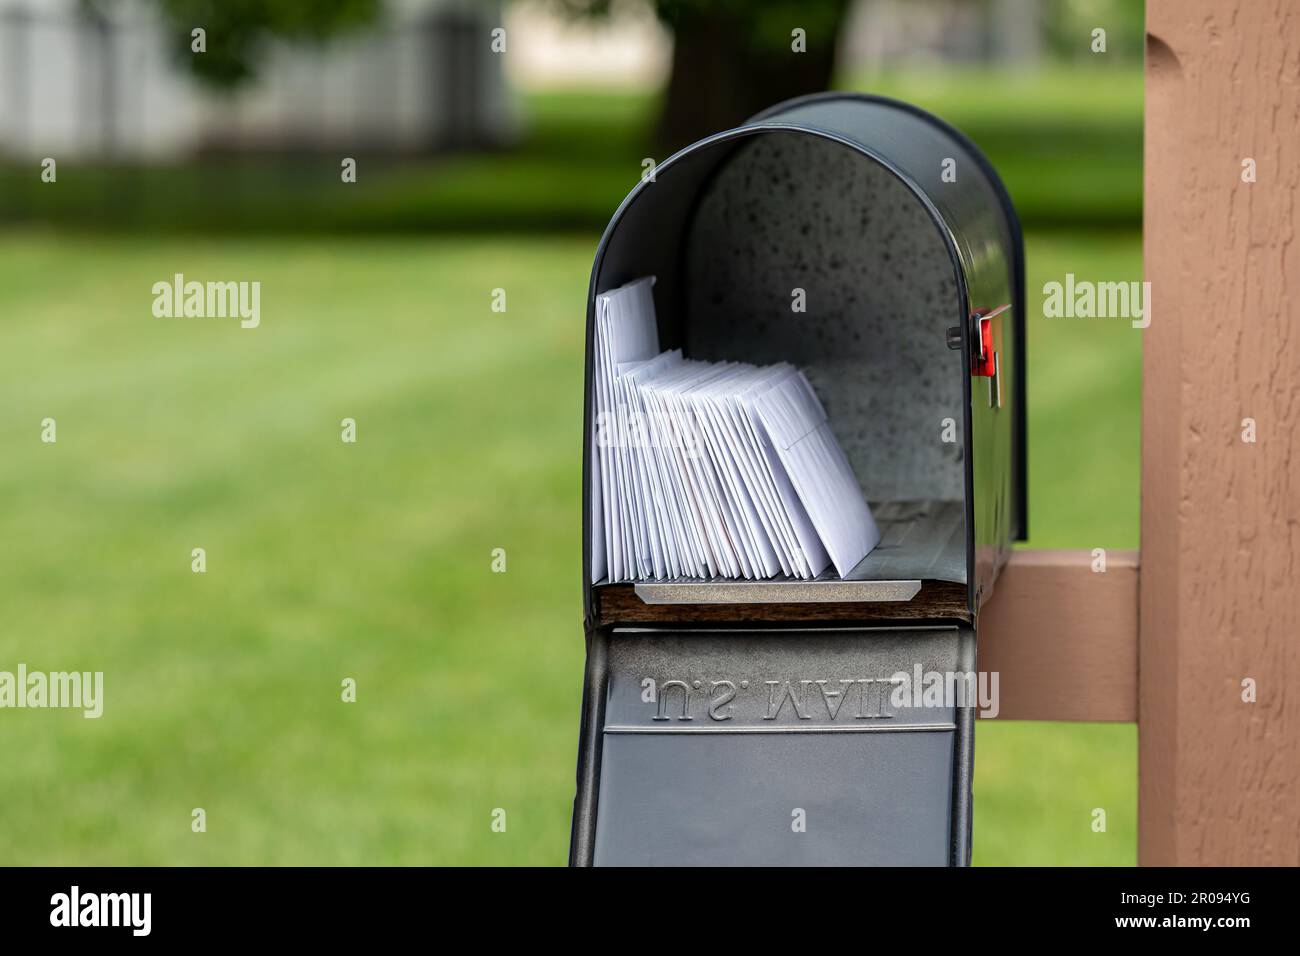 Mailbox full of letters and junk mail. Mail delivery, post office and postal service concept. Stock Photo